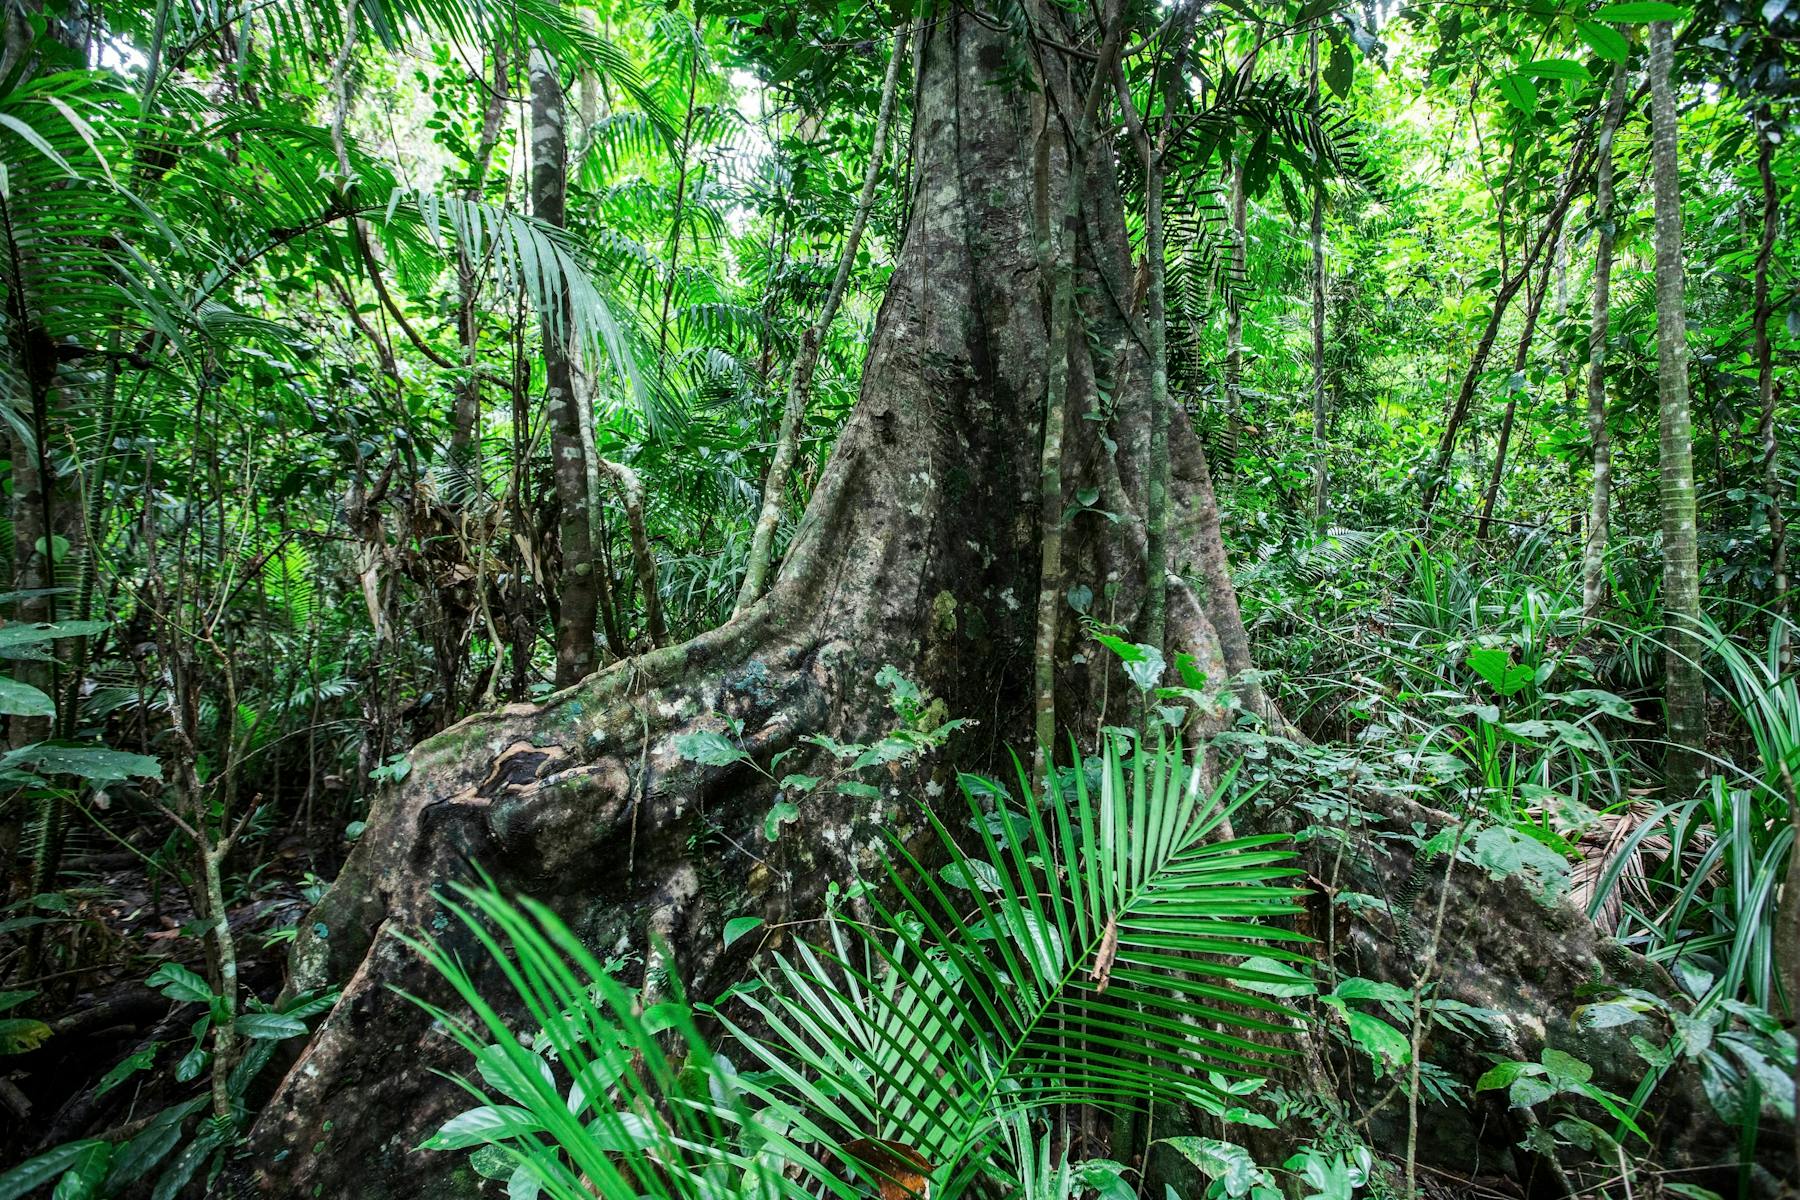 Large buttressed tree stands in lush rainforest.